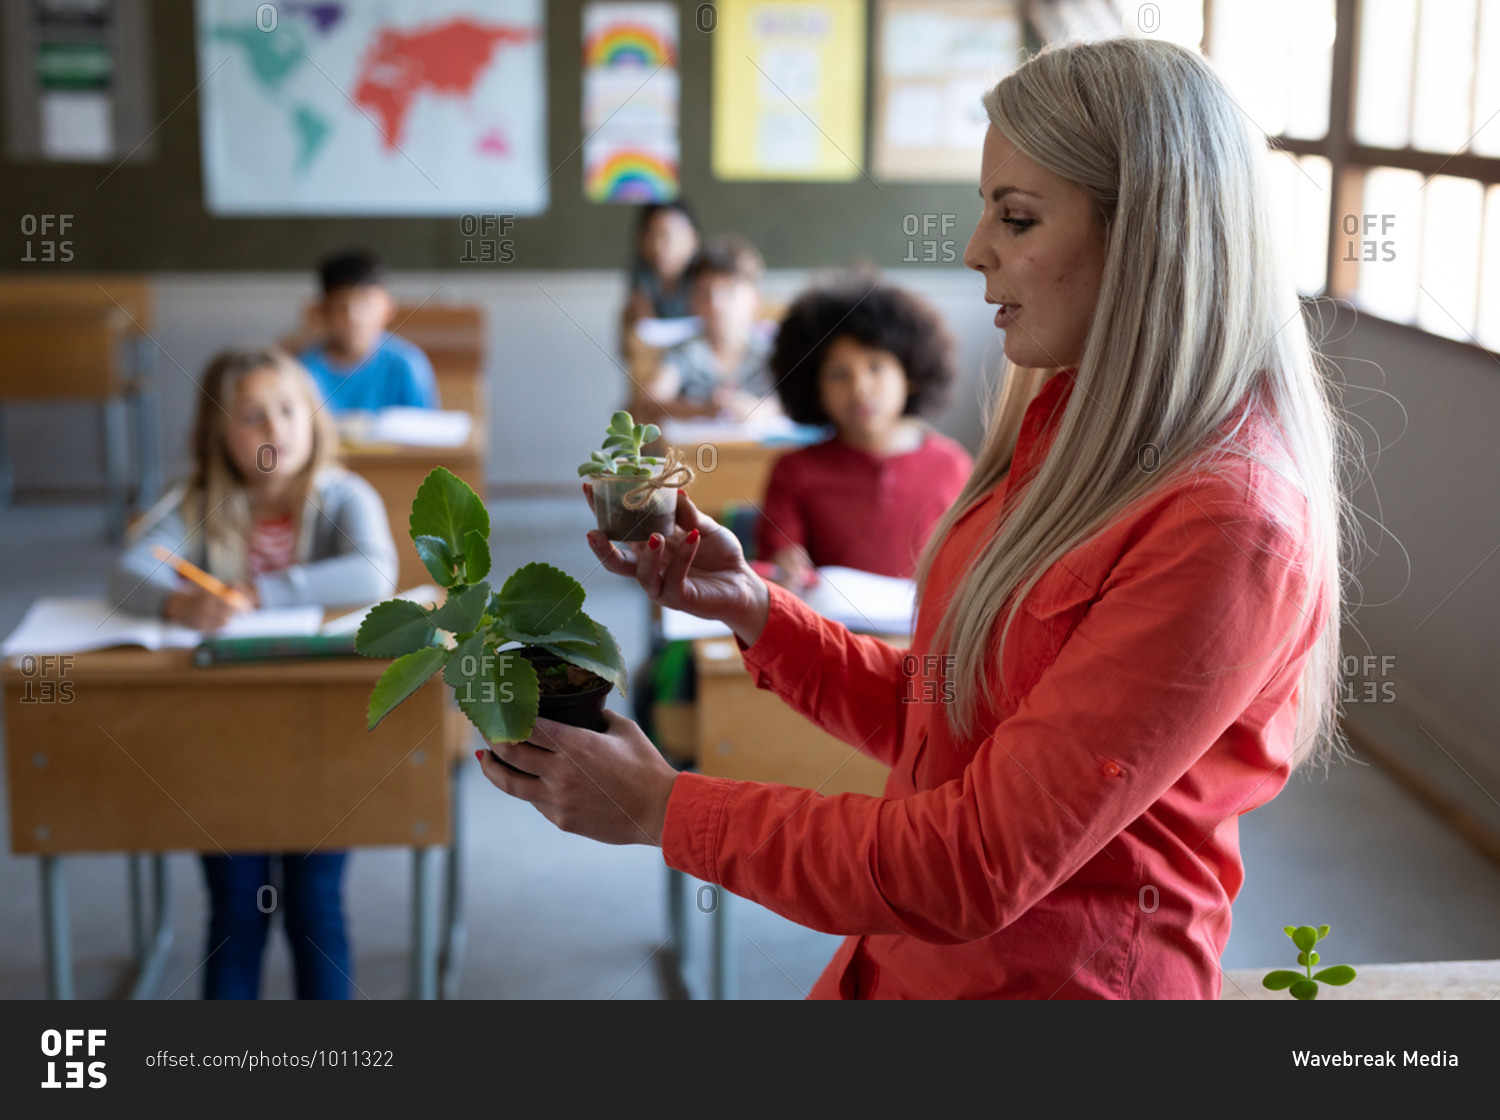 Female Caucasian teacher showing a plant pot to group of multi ethnic kids in class at school. Primary education social distancing health safety during Covid19 Coronavirus pandemic.